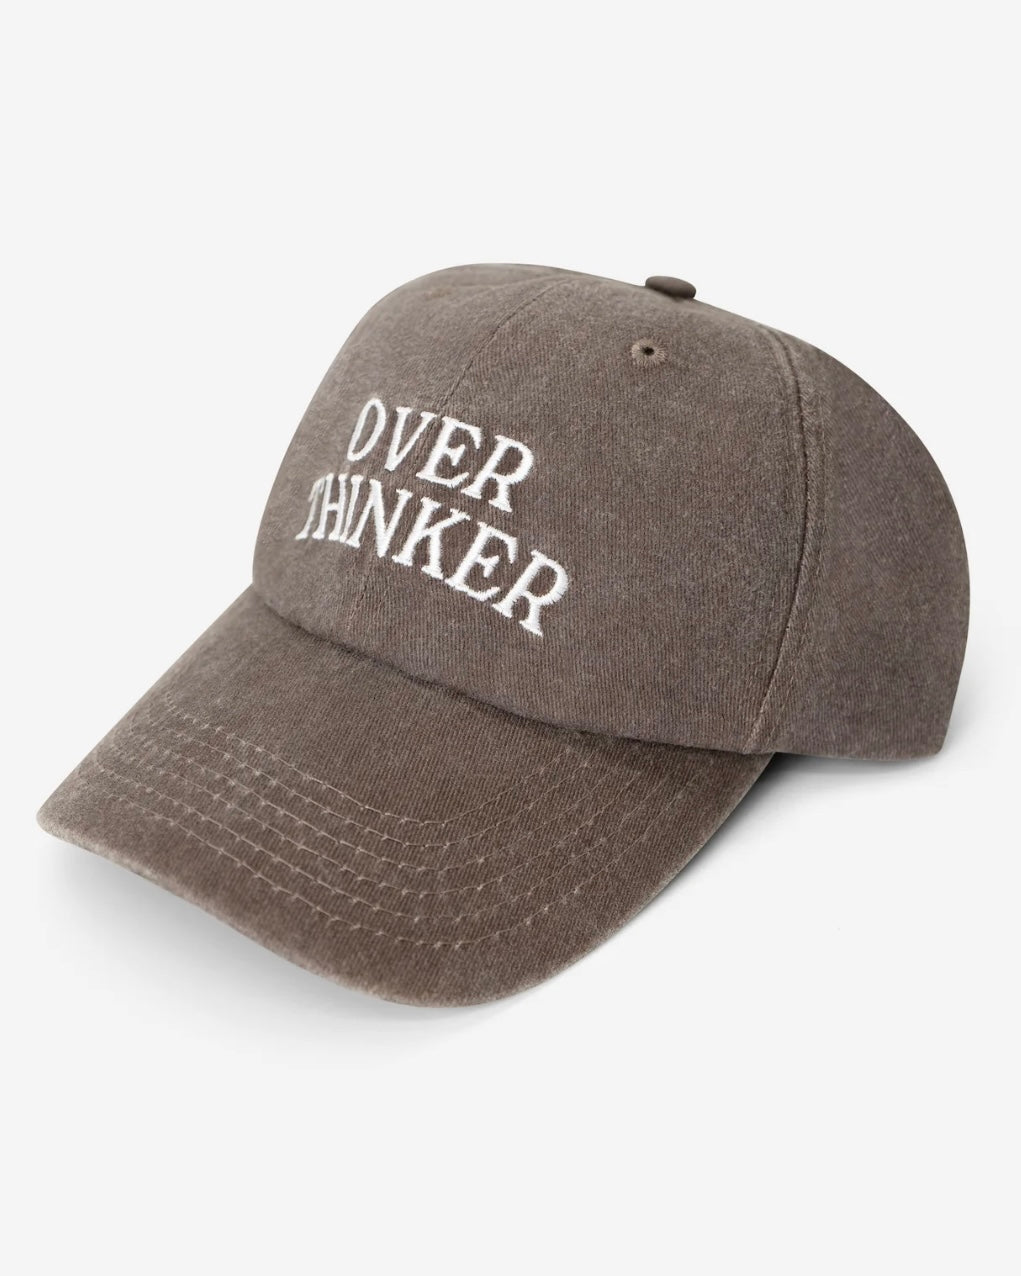 Overthinker (Breathe in &amp; out) Hat